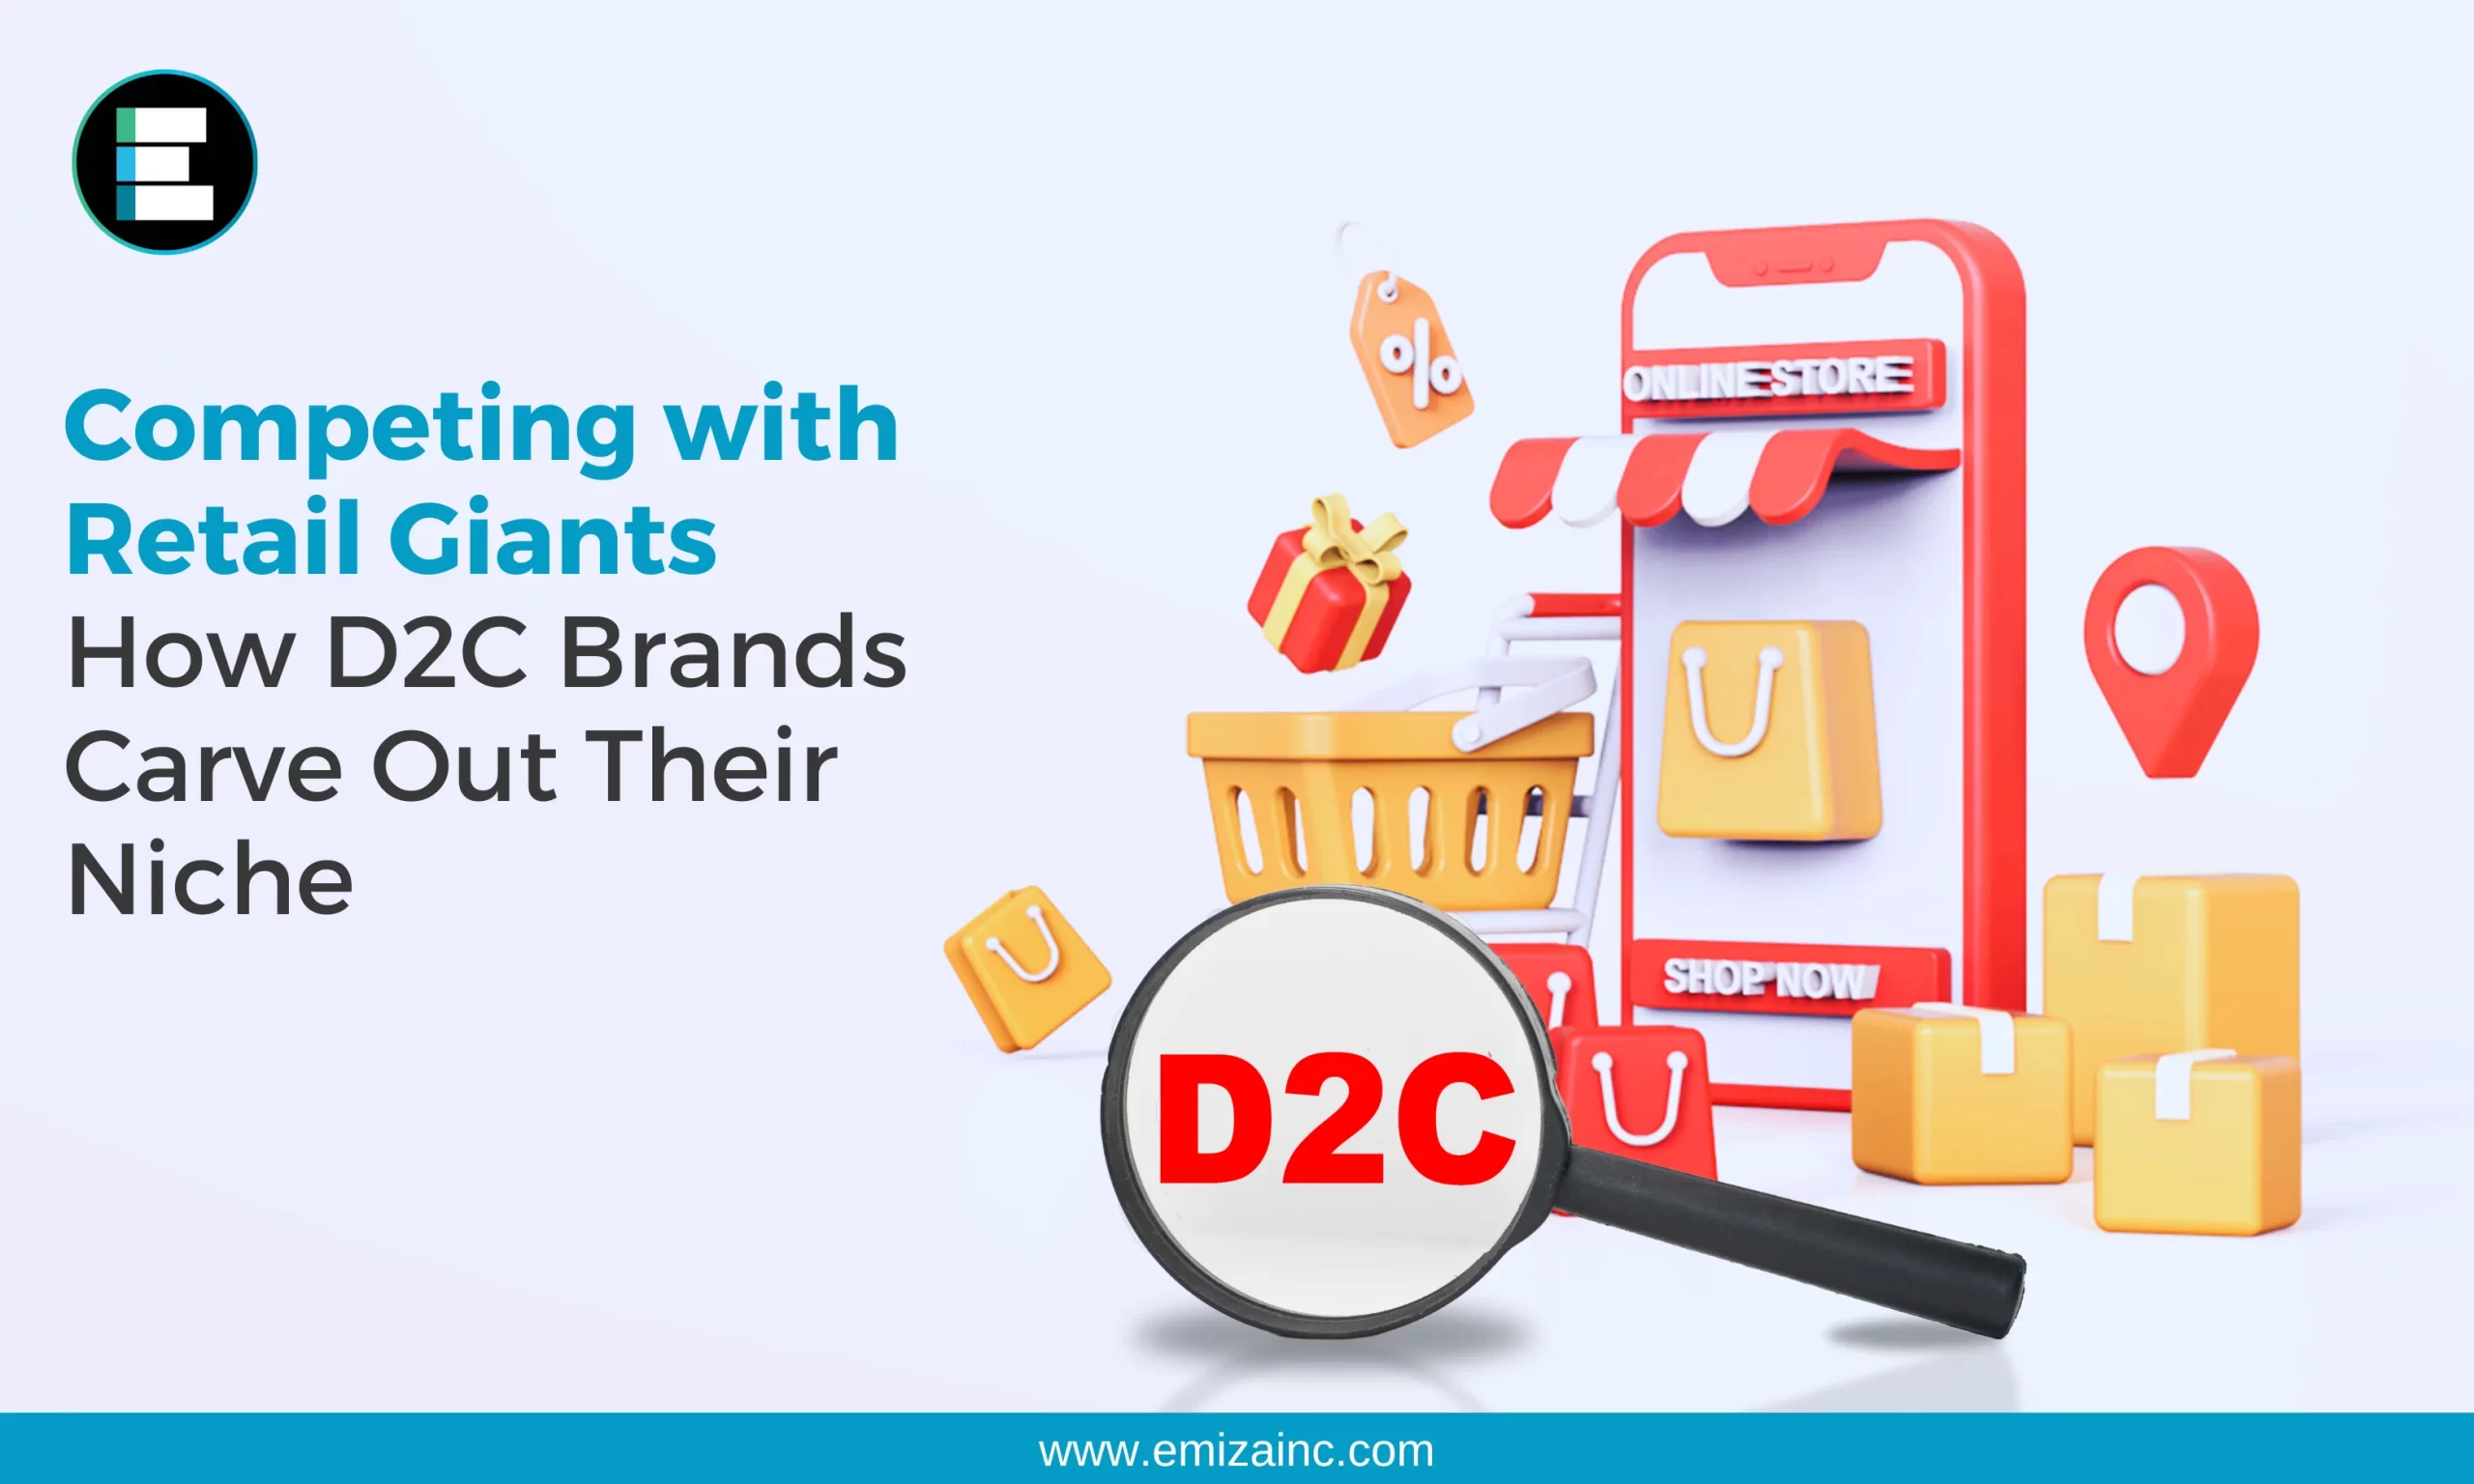 Competing with Retail Giants: How D2C Brands Carve Out Their Niche